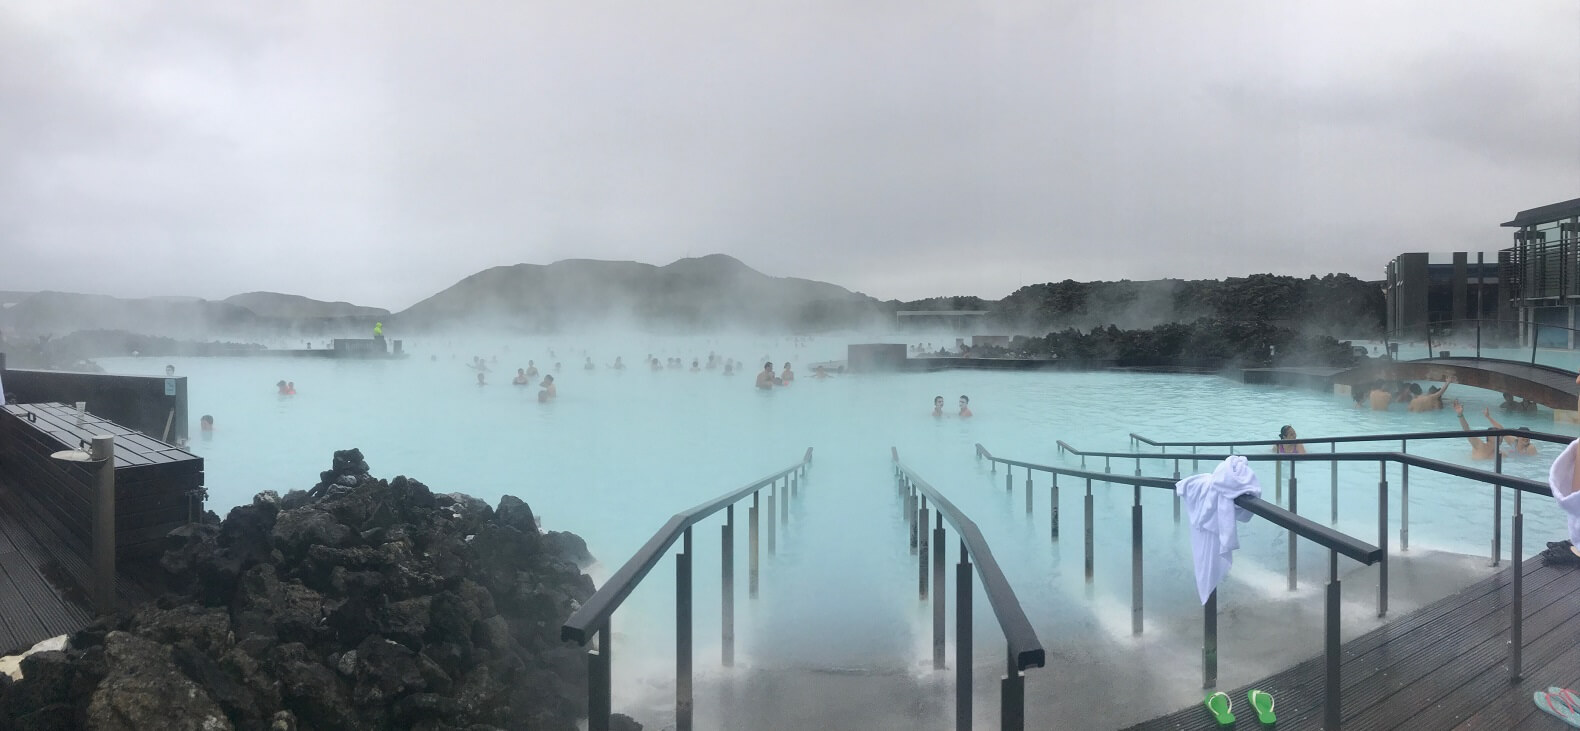 Visit Blue Lagoon and make the most of your visit to Iceland.